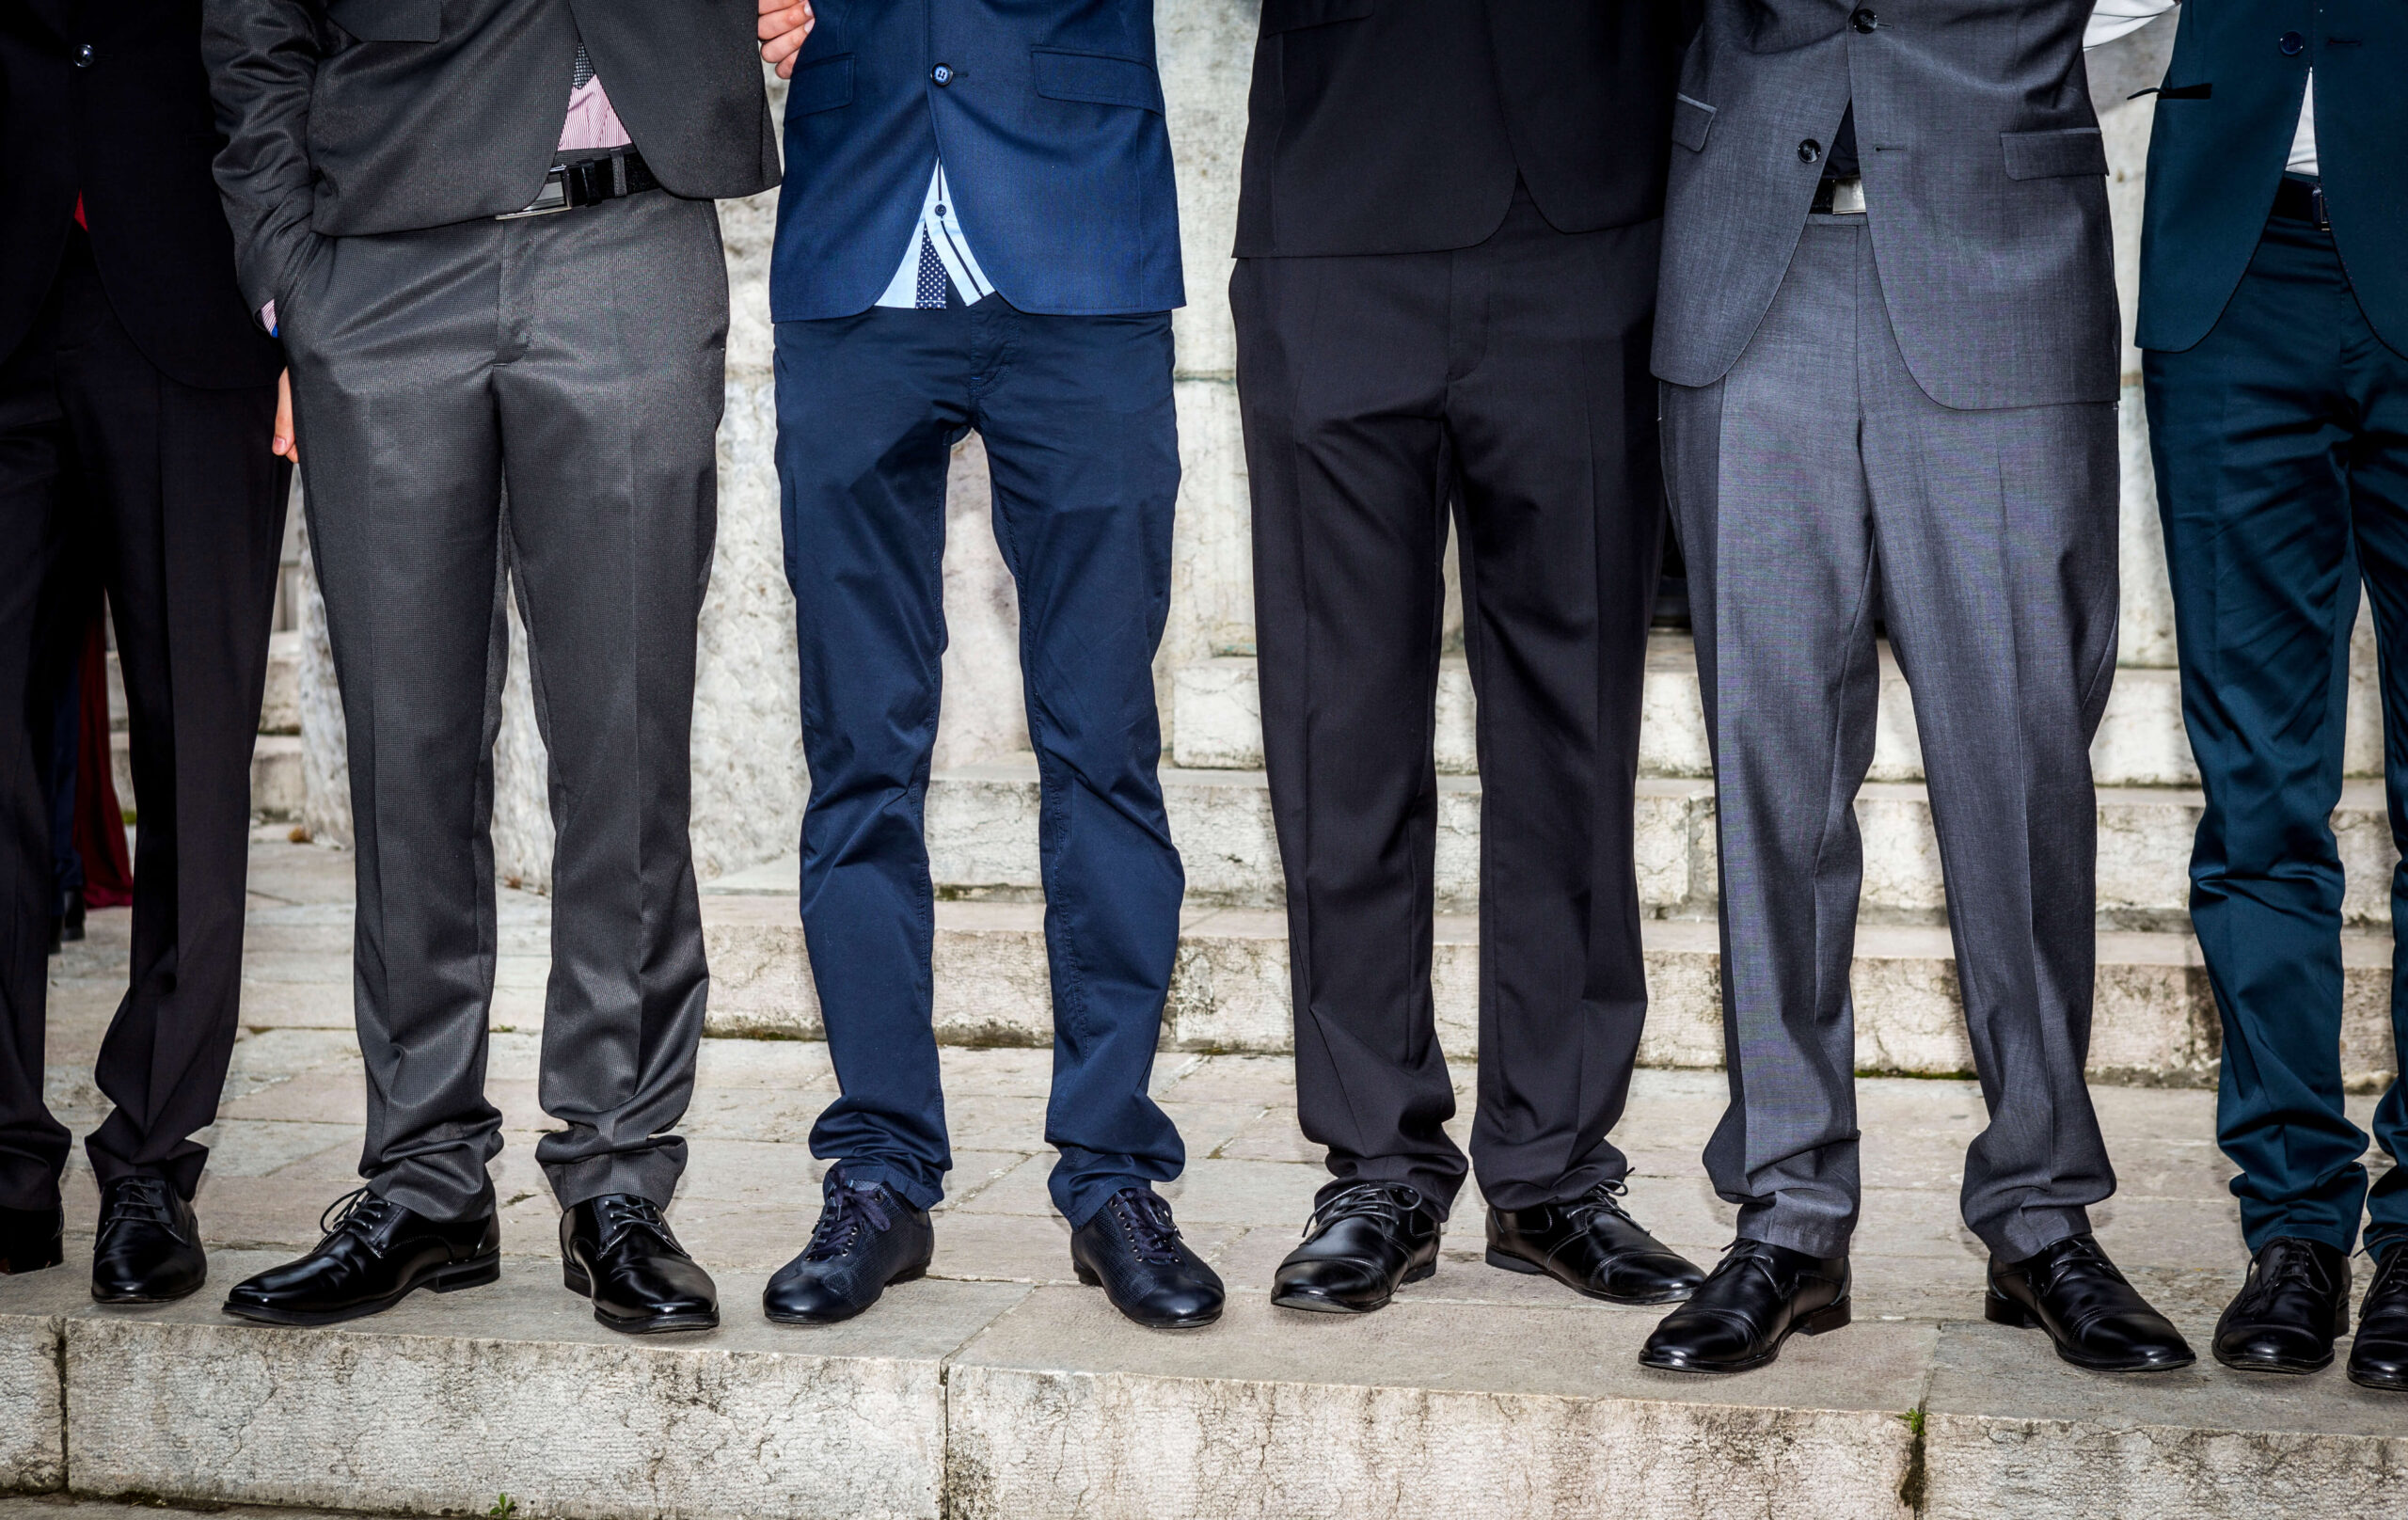 Six pairs of men wearing suits; image of legs standing in horizontal line.